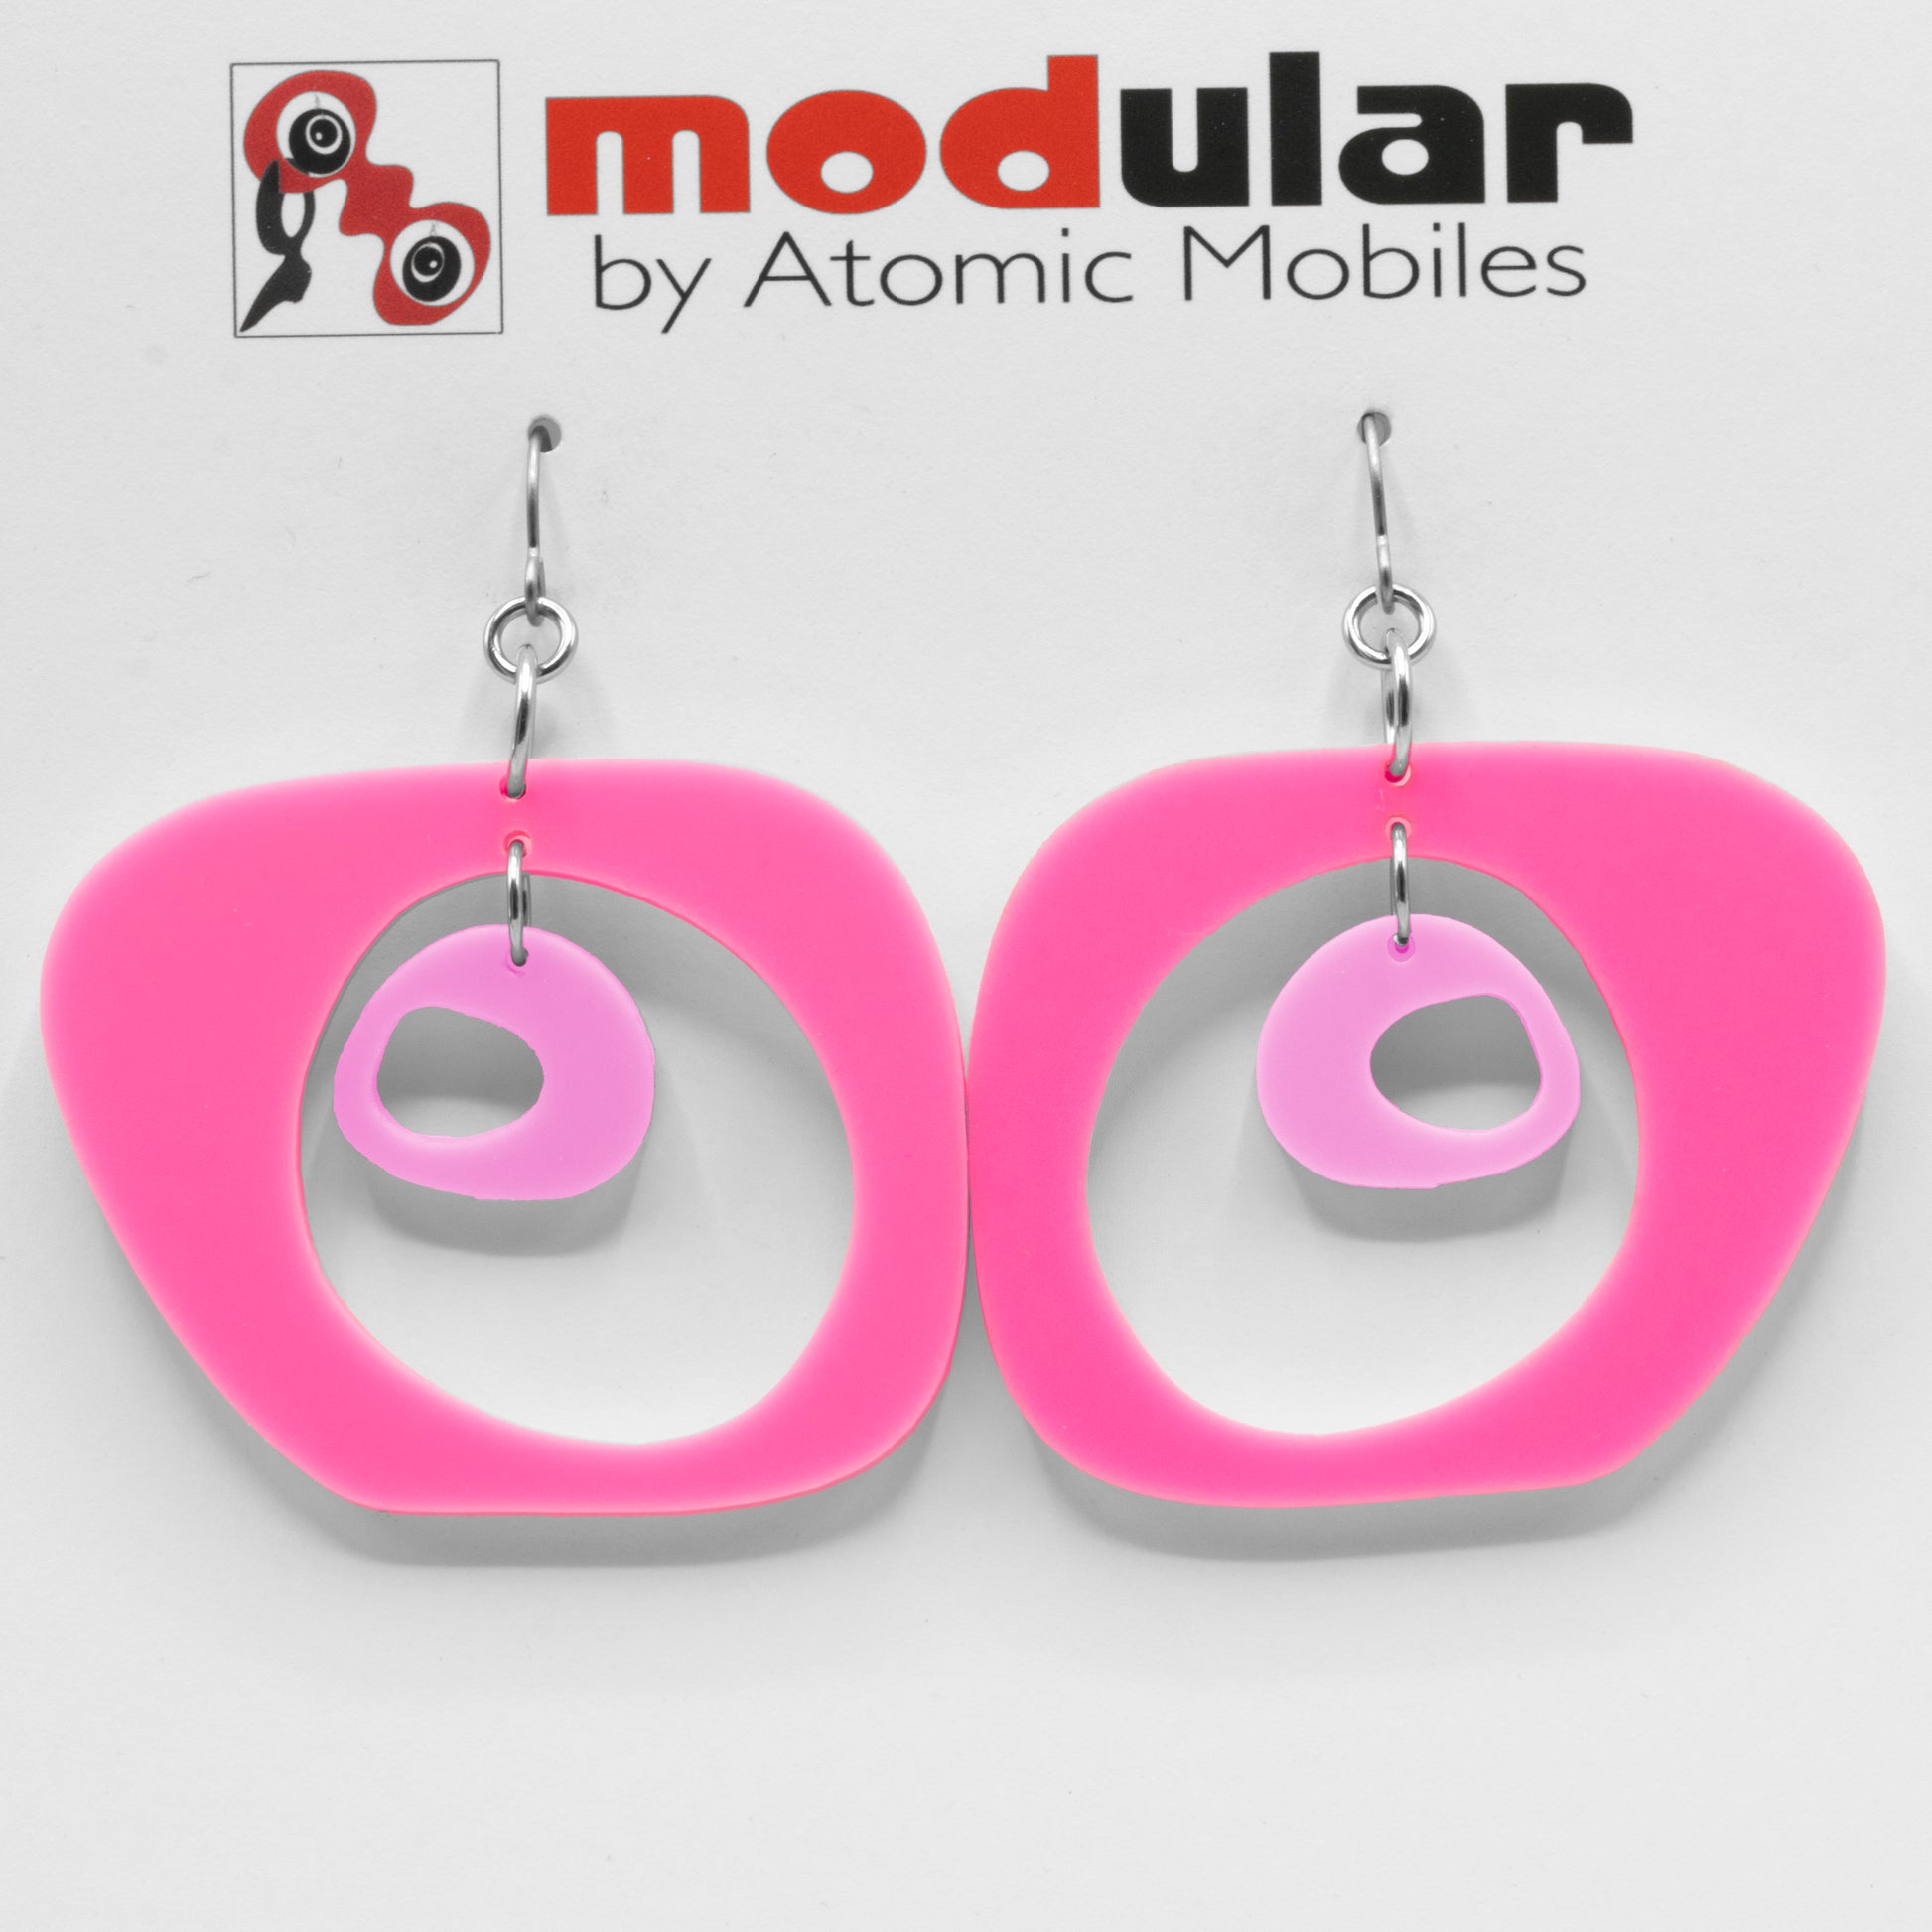 MODular Earrings - Paris Statement Earrings in Hot Pink by AtomicMobiles.com - retro era inspired mod handmade jewelry